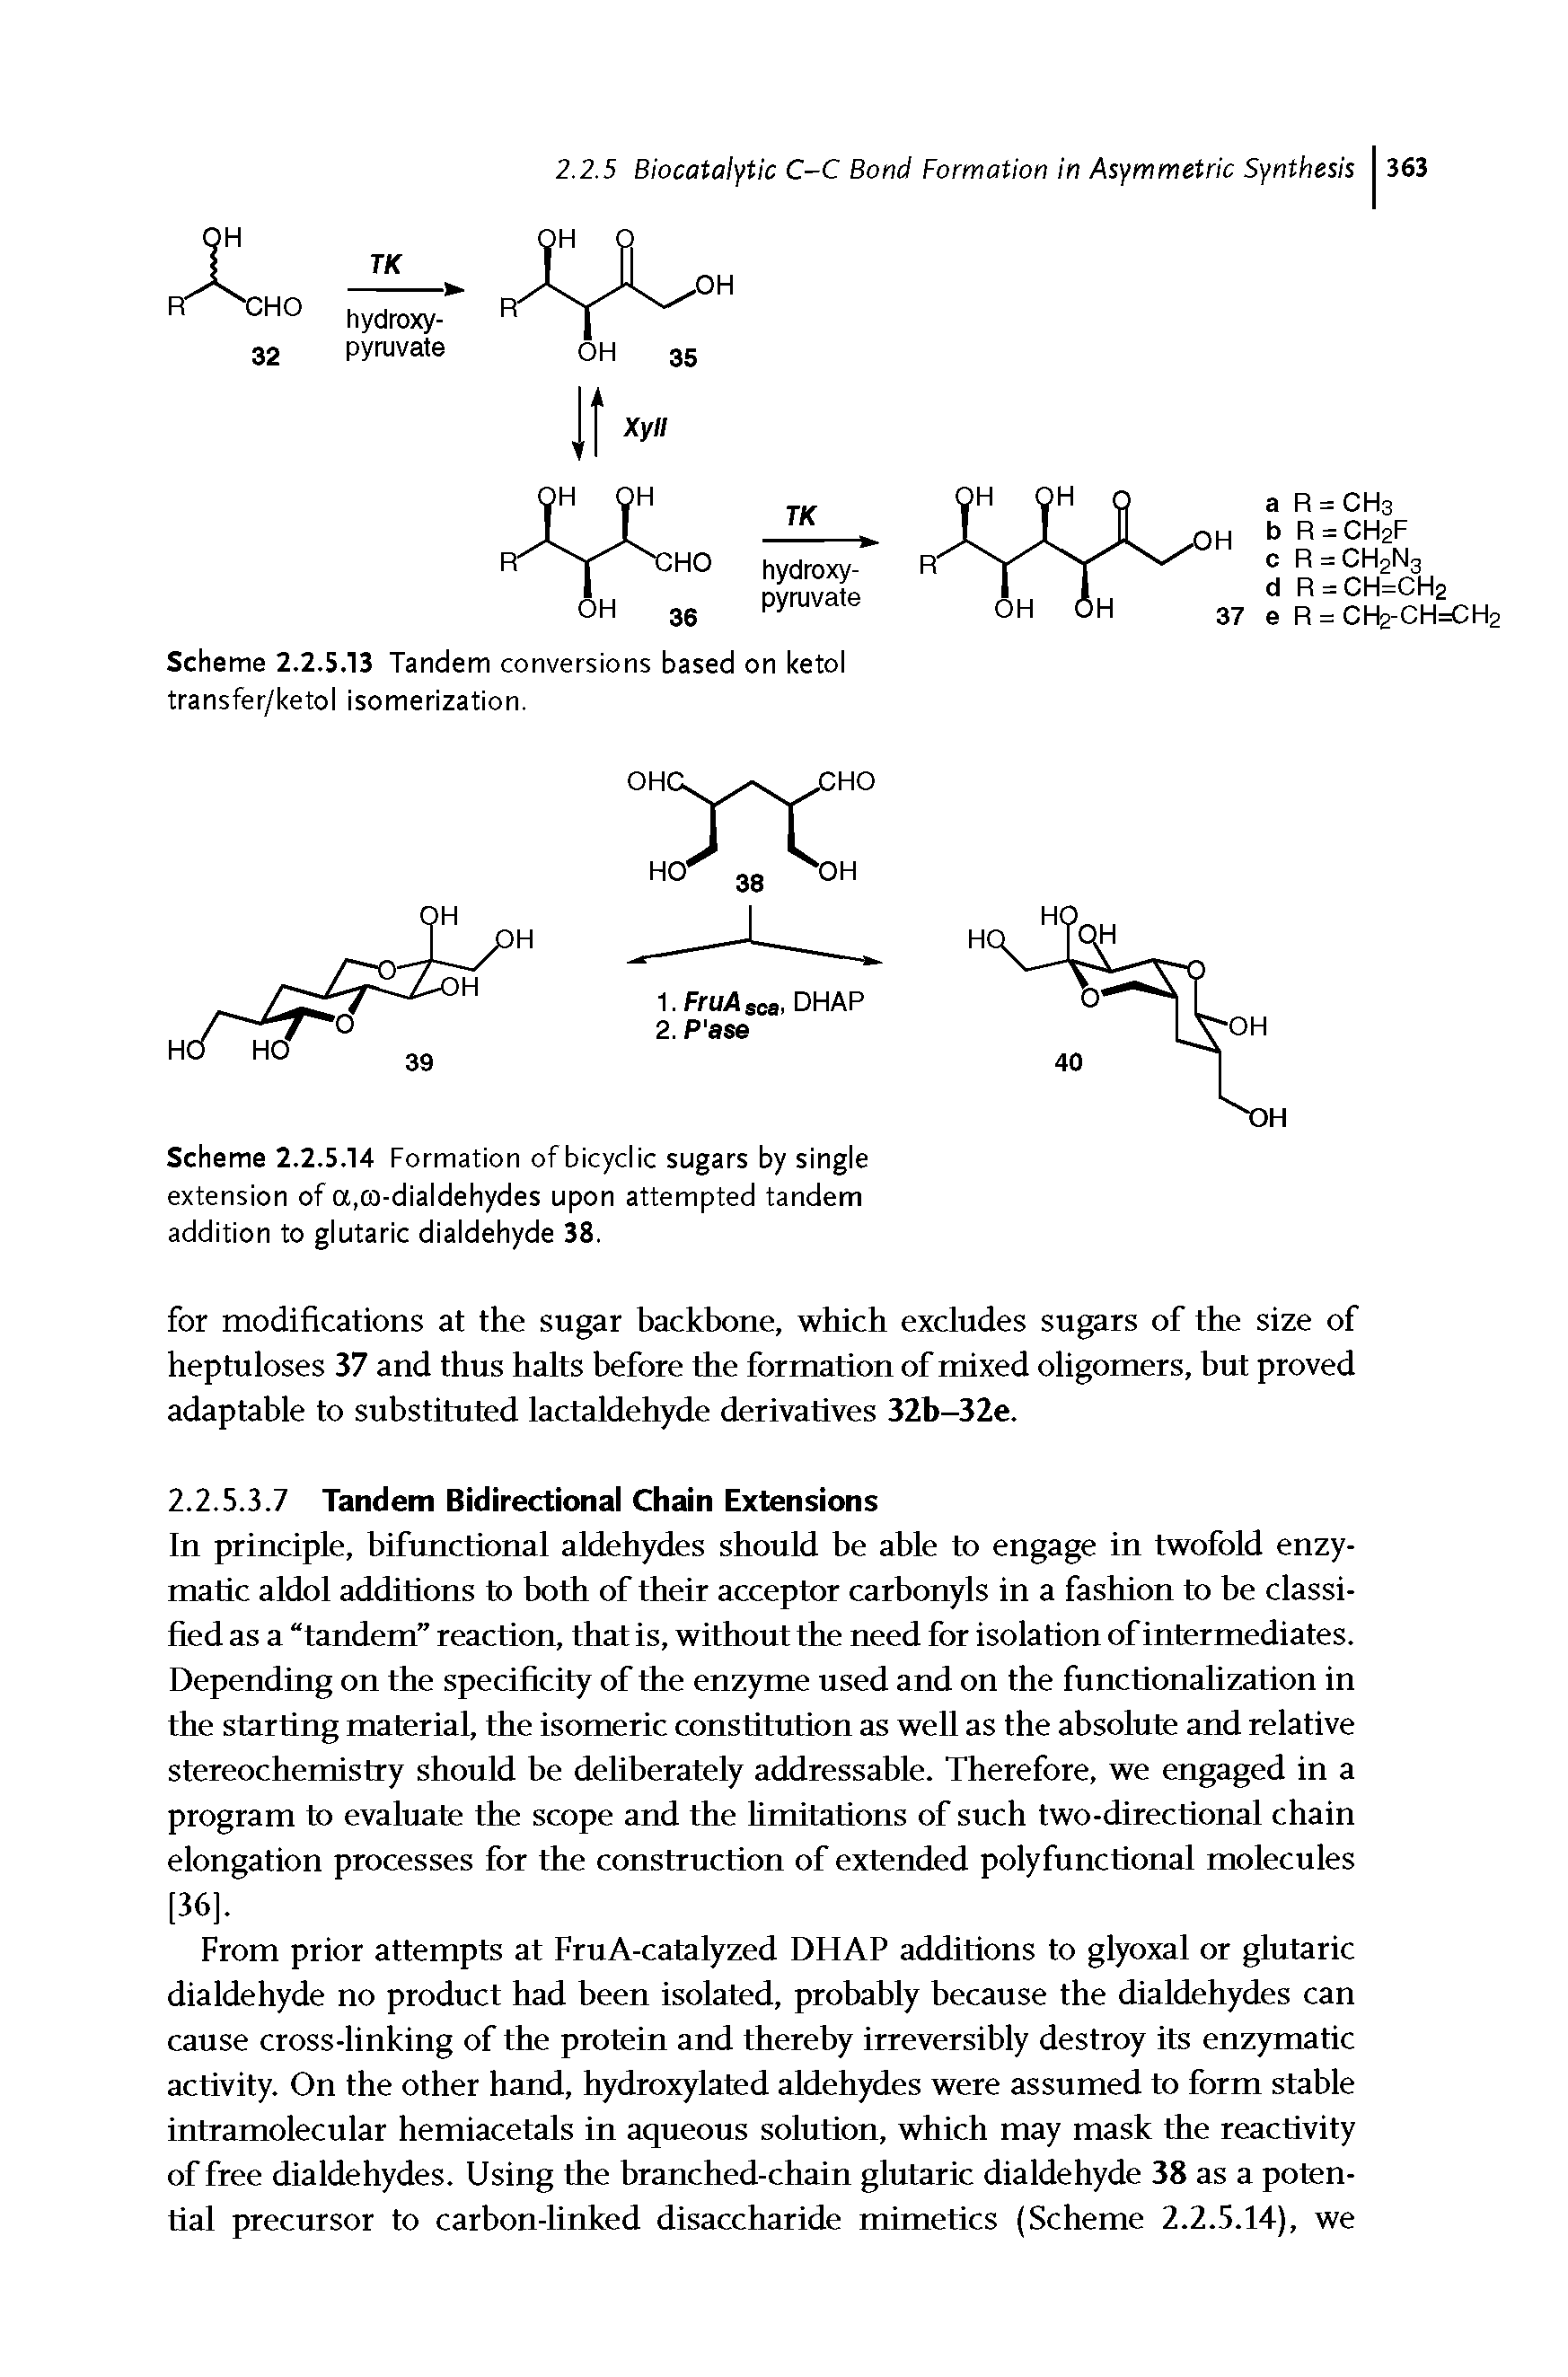 Scheme 2.2.5.14 Formation of bicyclic sugars by single extension of a,co-dialdehydes upon attempted tandem addition to glutaric dialdehyde 38.